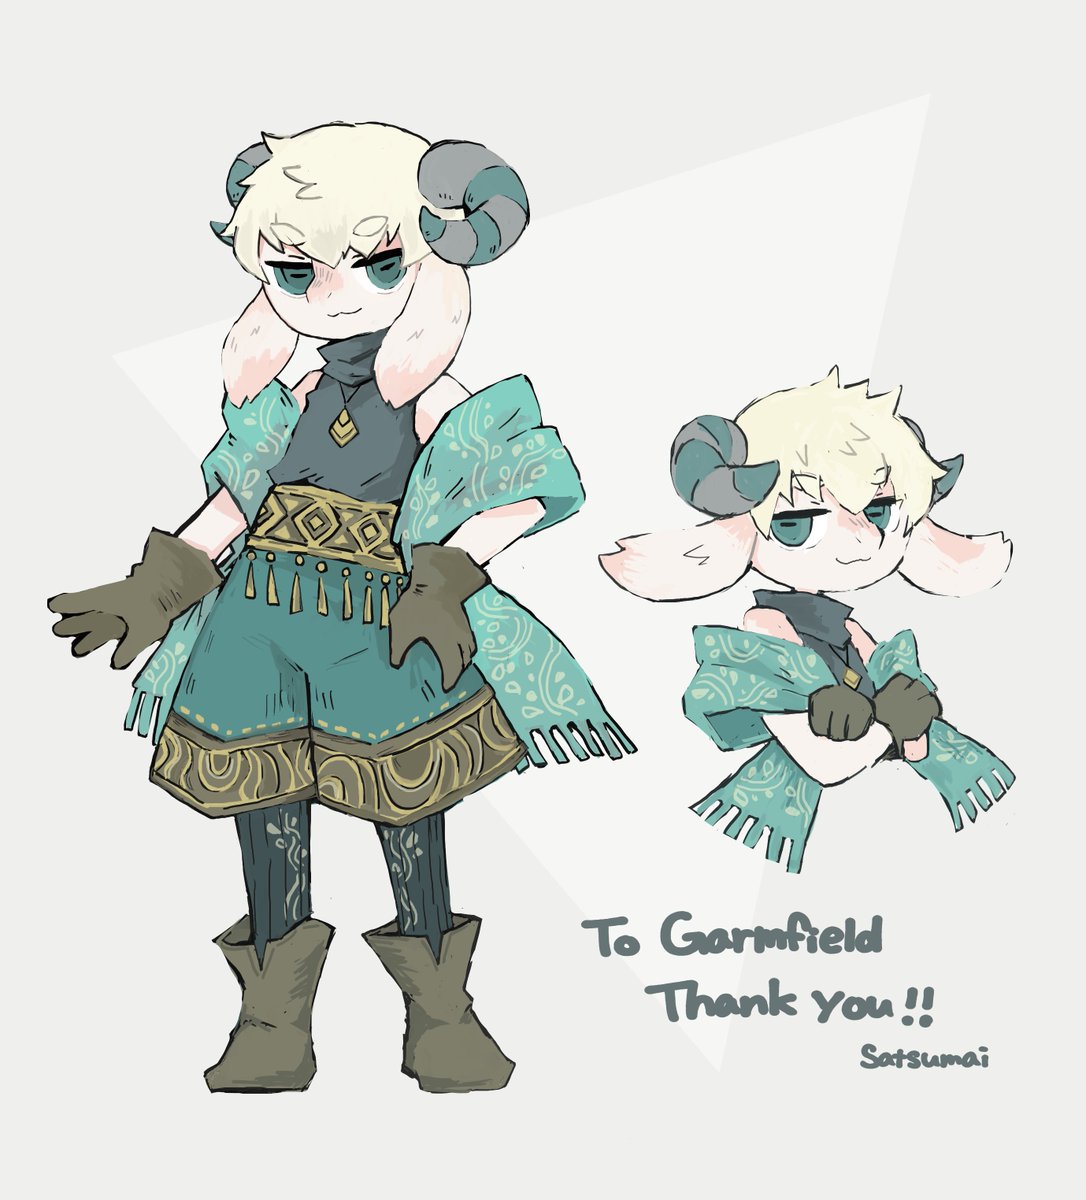 「Thank you for the request!! #Skeb #Commi」|薩摩井 / いも天のイラスト